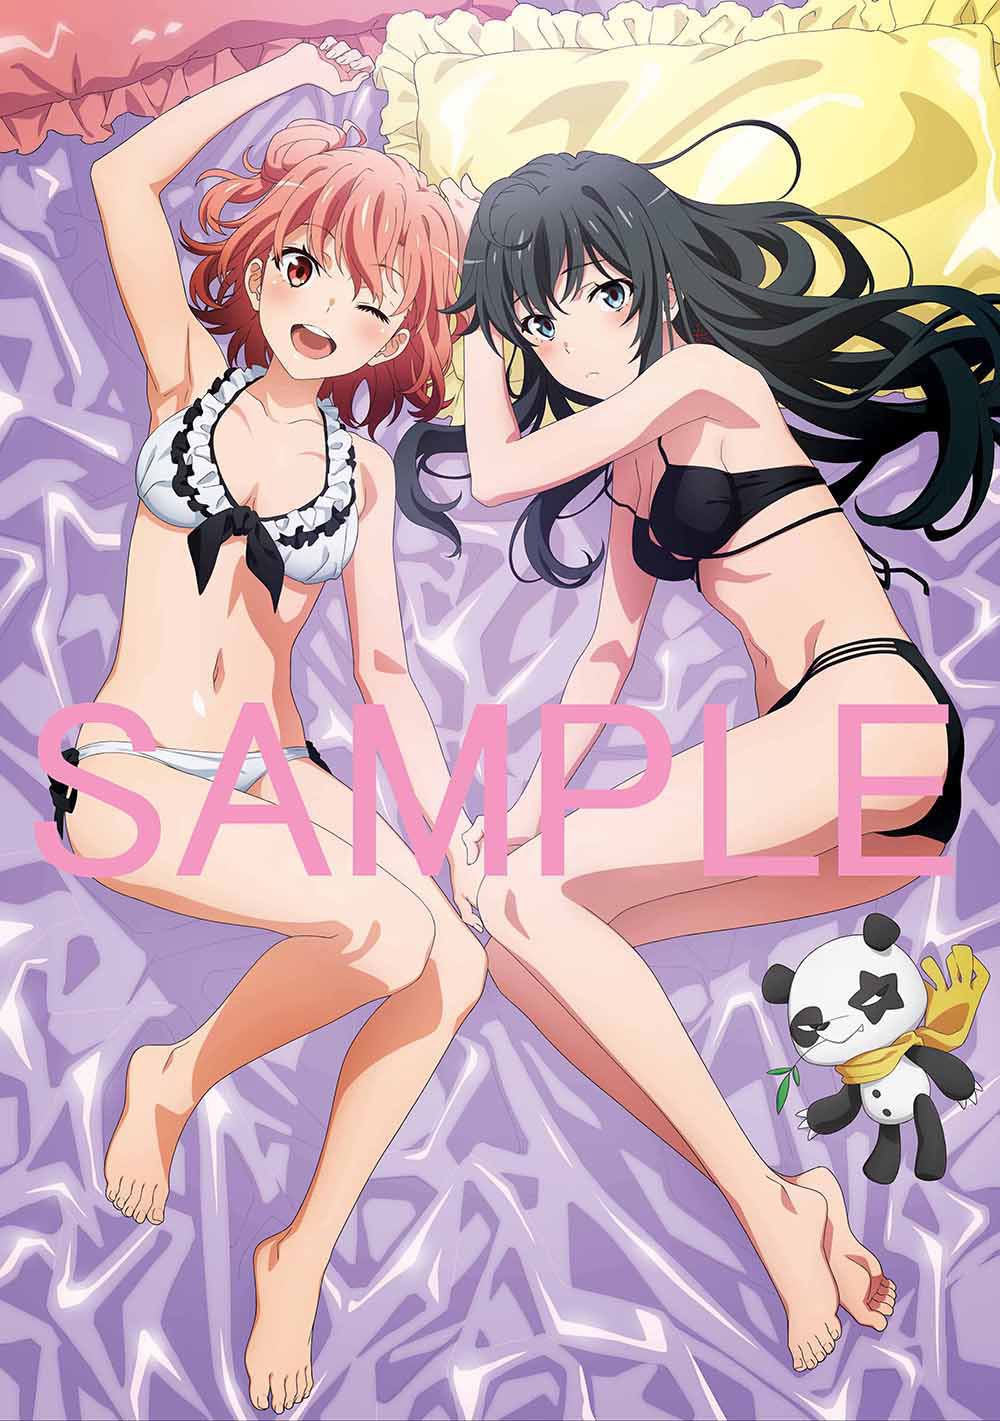 Anime [I Gyle] erotic illustrations such as swimsuits and dresses of in BD / DVD store benefits of the third phase 9